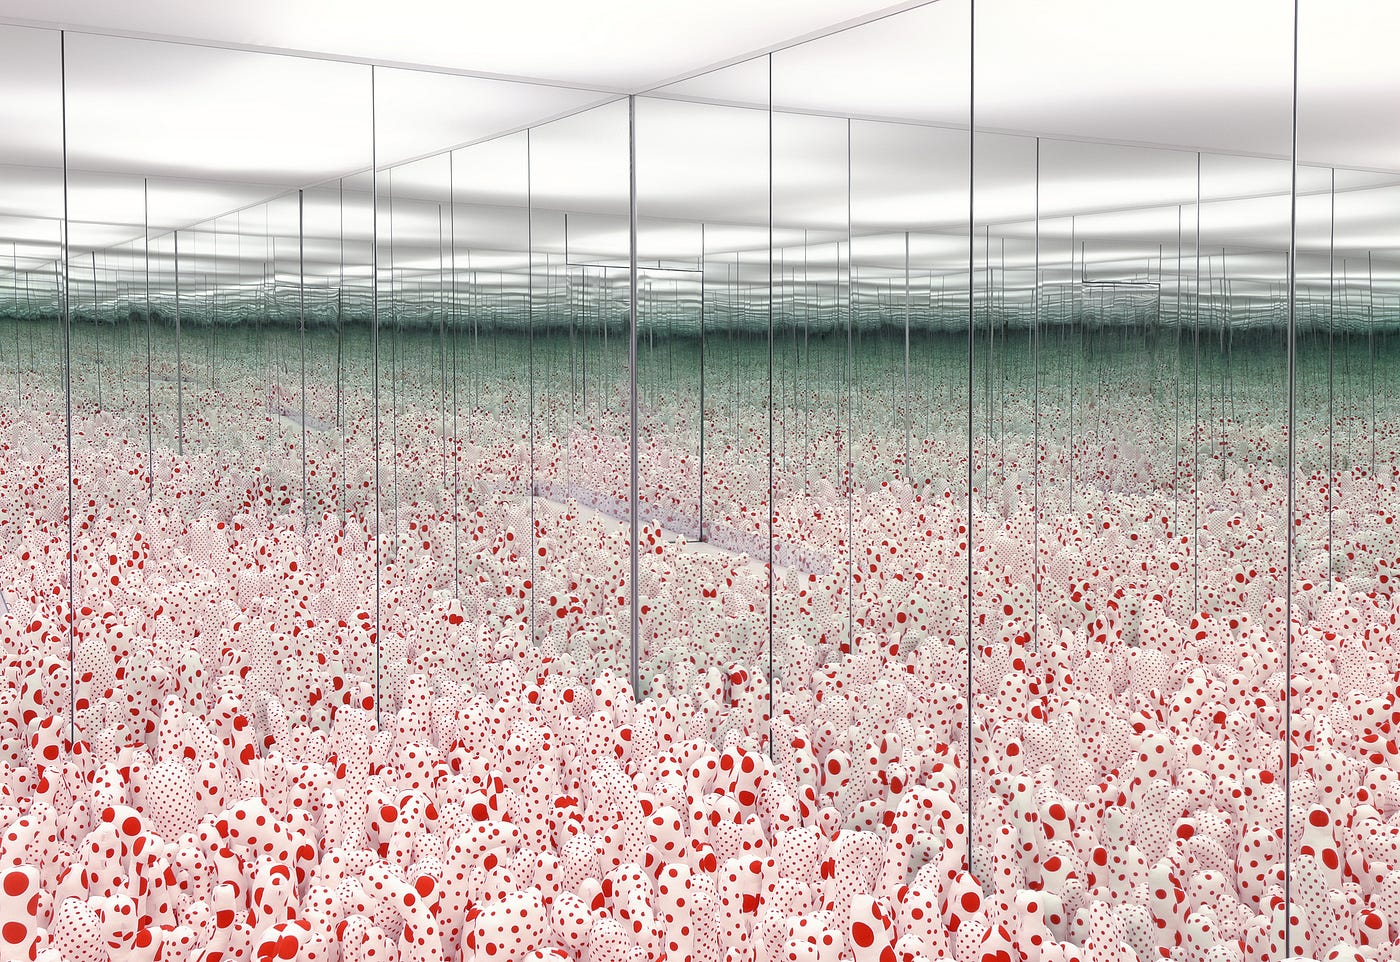 Who is Yayoi Kusama? The Cleveland “Infinity Mirrors” Exhibition Open Now |  by Cleveland Museum of Art | CMA Thinker | Medium